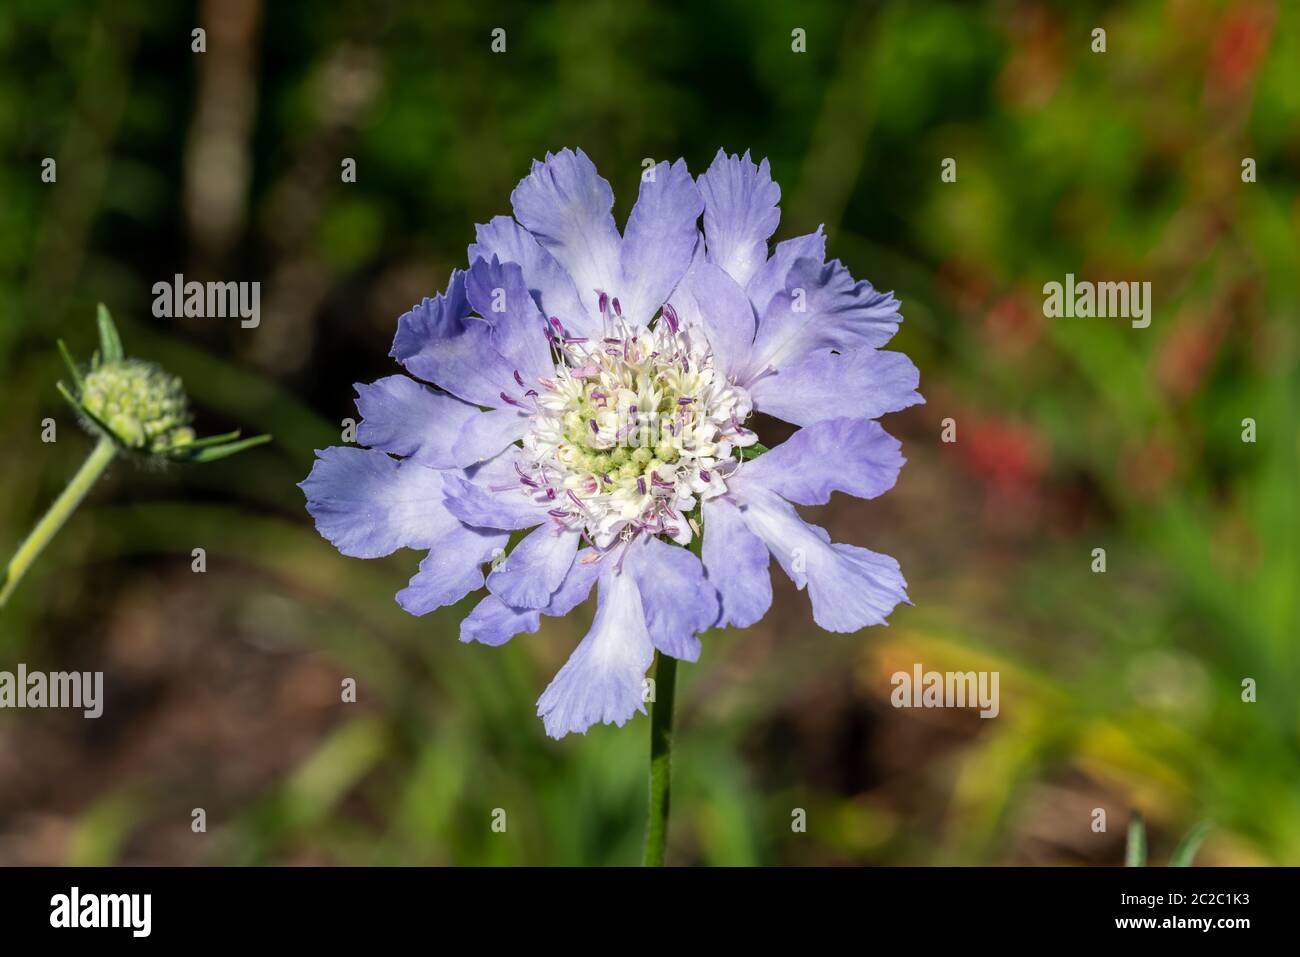 Scabiosa Caucasica Isaac House A Blue Summer Perennial Flowering Plant Commonly Known As Pincushion Flower Stock Photo Alamy